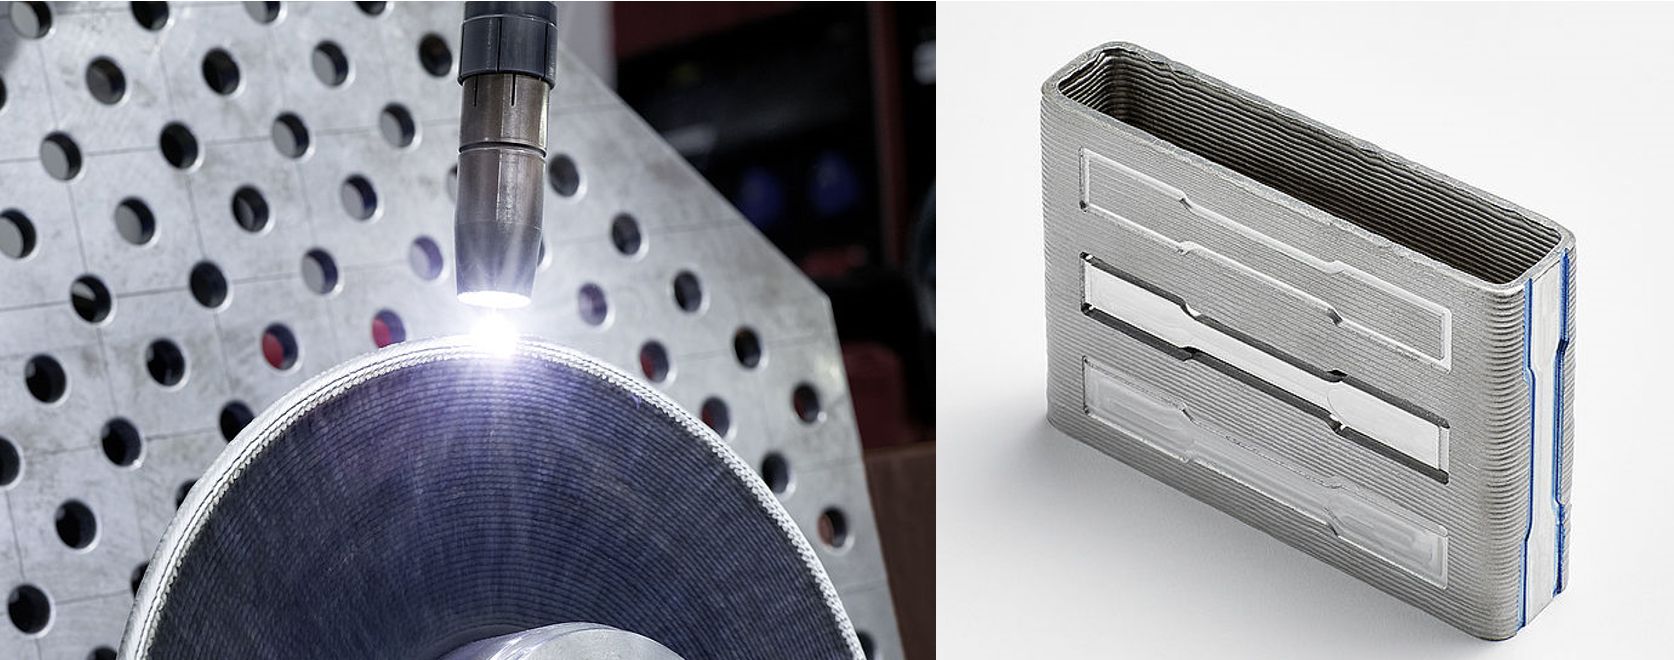 Left: Building a component using wire-based 3D printing via arc, right: a finished aluminum component